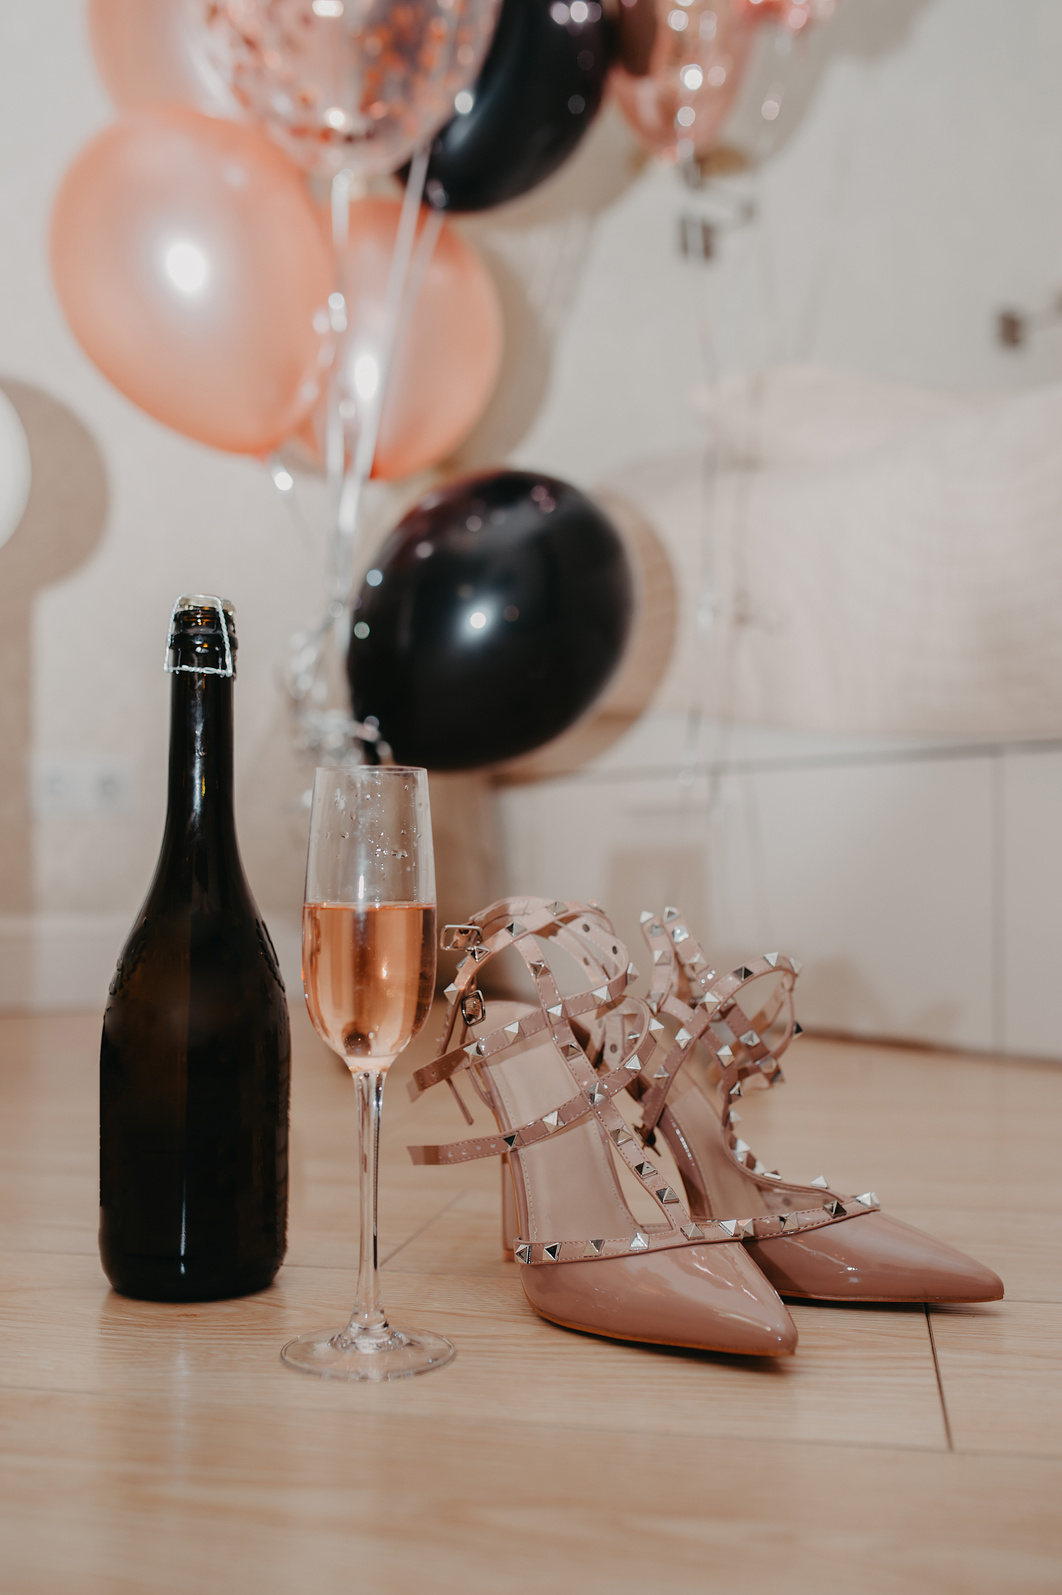 invitation card for a bachelorette party, stylish beige sandals with spikes, a glass of pink champagne and a bottle on a background of pink and black balloons horizontally